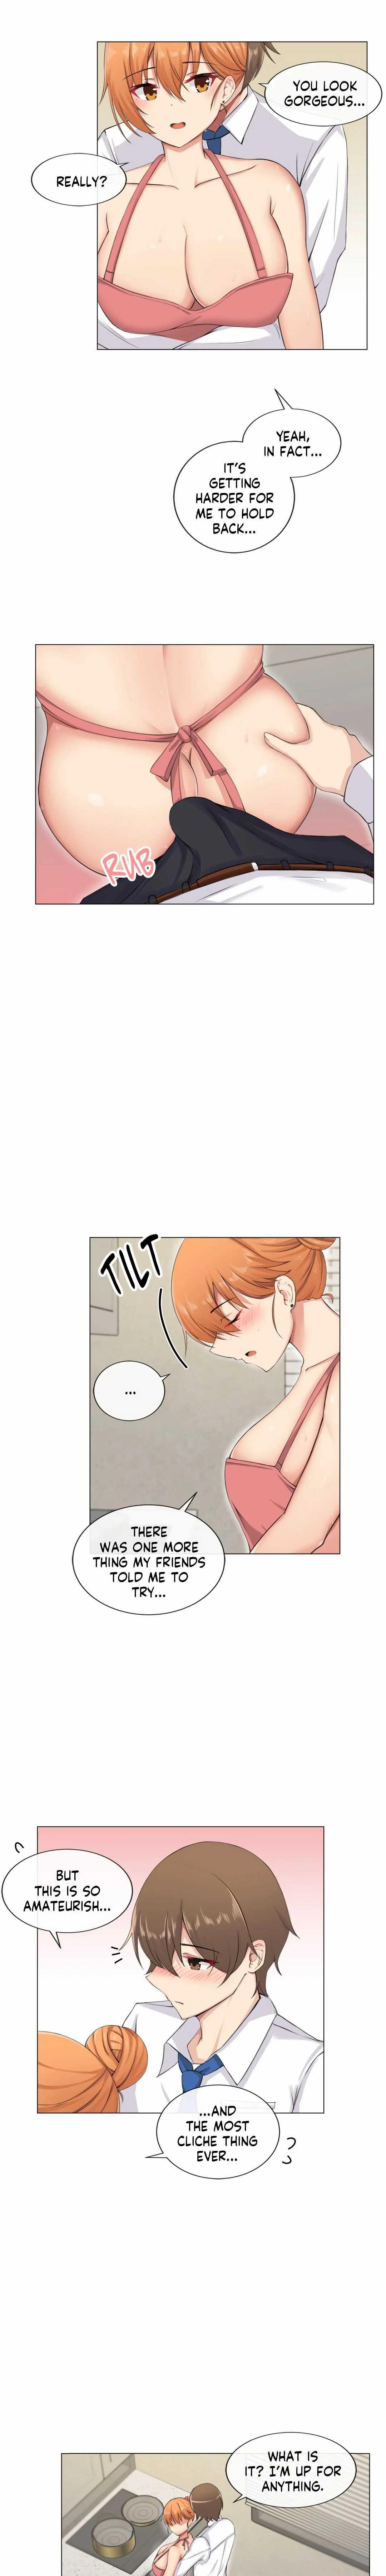 [Dumangoon, 130F] Sexcape Room: Pile Up Ch.9/9 [English] [Manhwa PDF] Completed 116